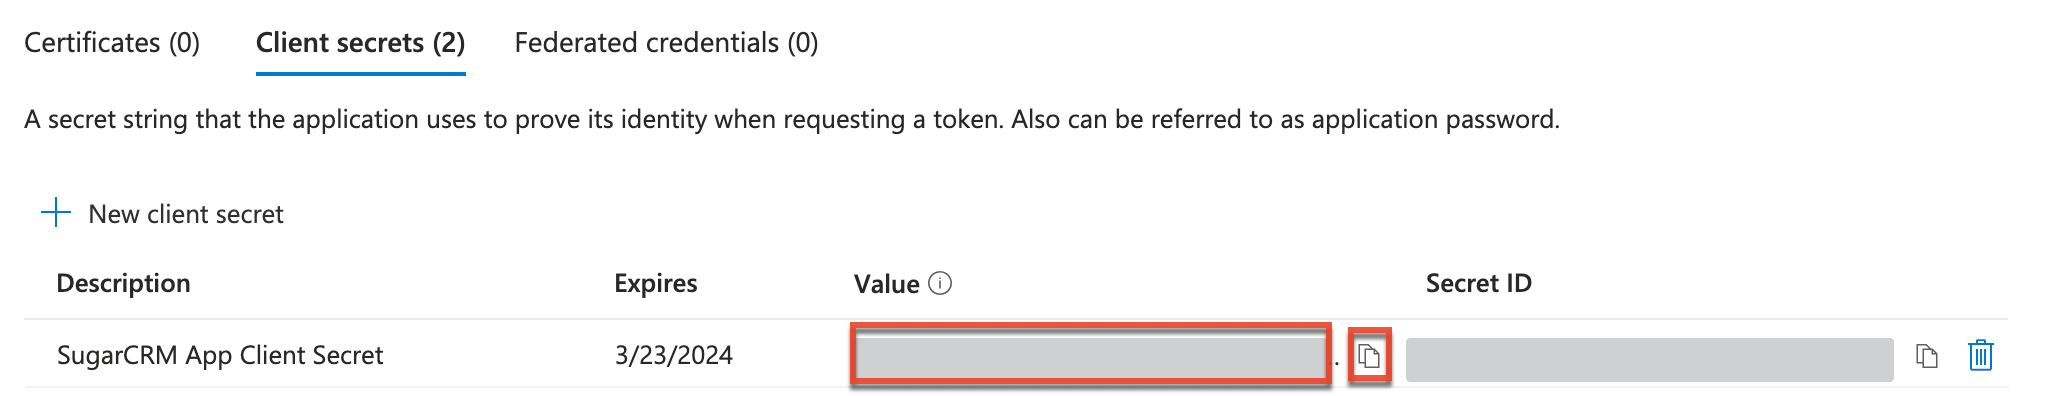 Integrating_With_Microsoft_Connector_For_Admins_ClientSecretValue